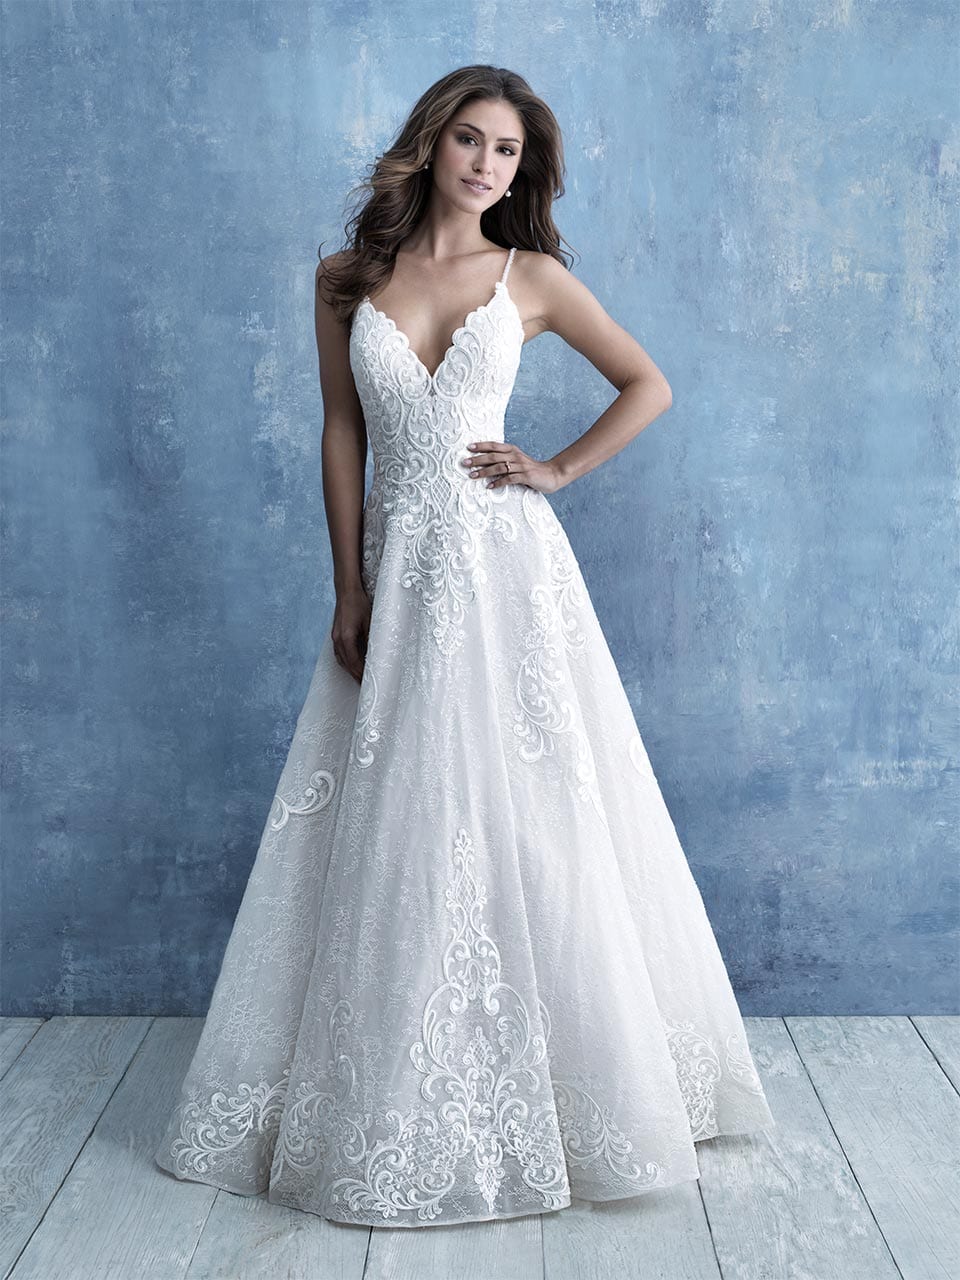 Allure Bridals  Pearl's Place Bridal Gowns Louisiana